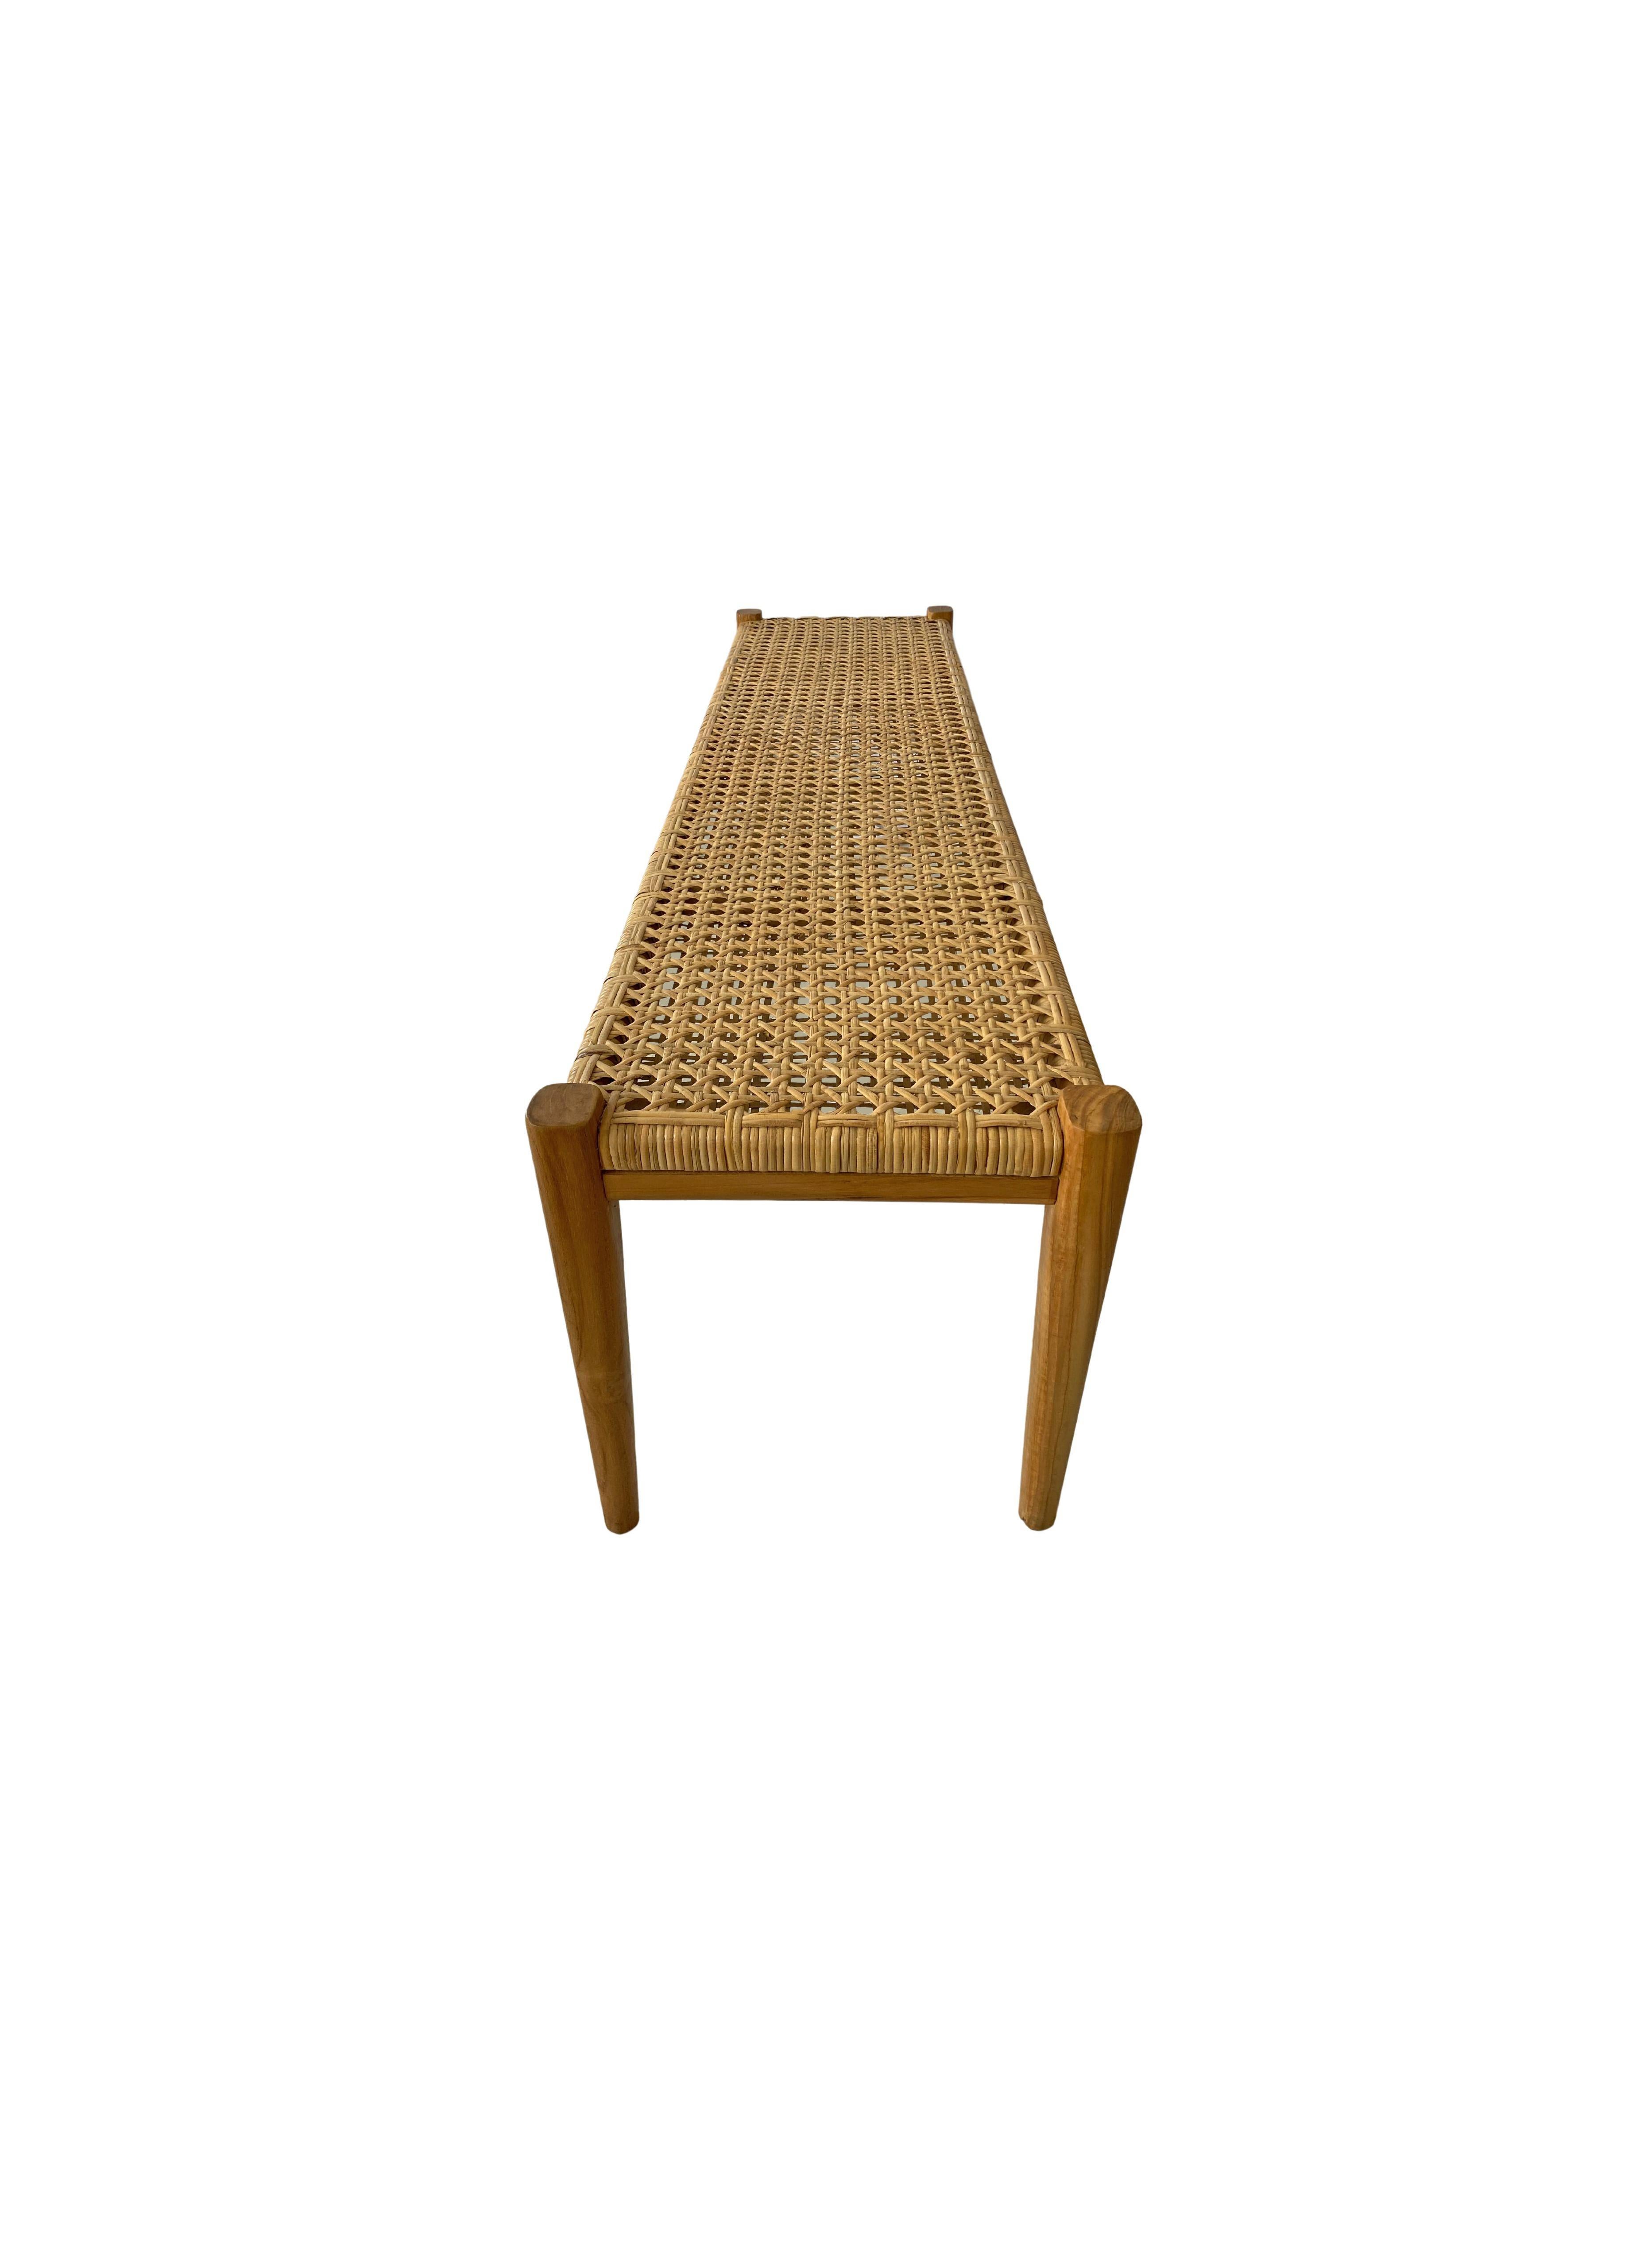 Modern Teak Wood Framed Bench, with Woven Rattan Seat For Sale